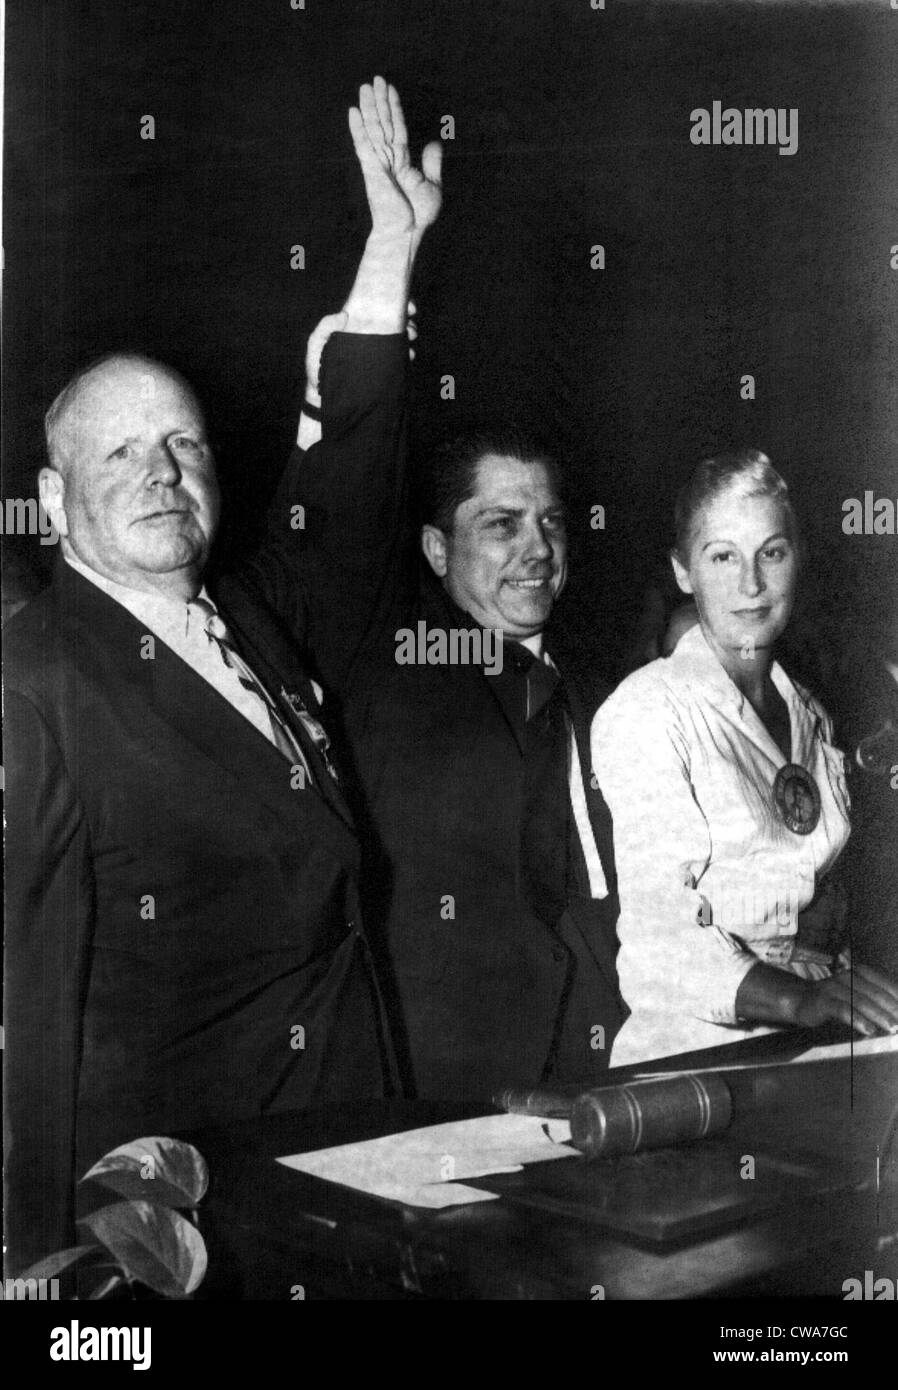 JAMES R. HOFFA-With his wife and Dave Beck after winning Teamsters Union election, Miami Beach, FL. 10/4/57. Courtesy: CSU Stock Photo